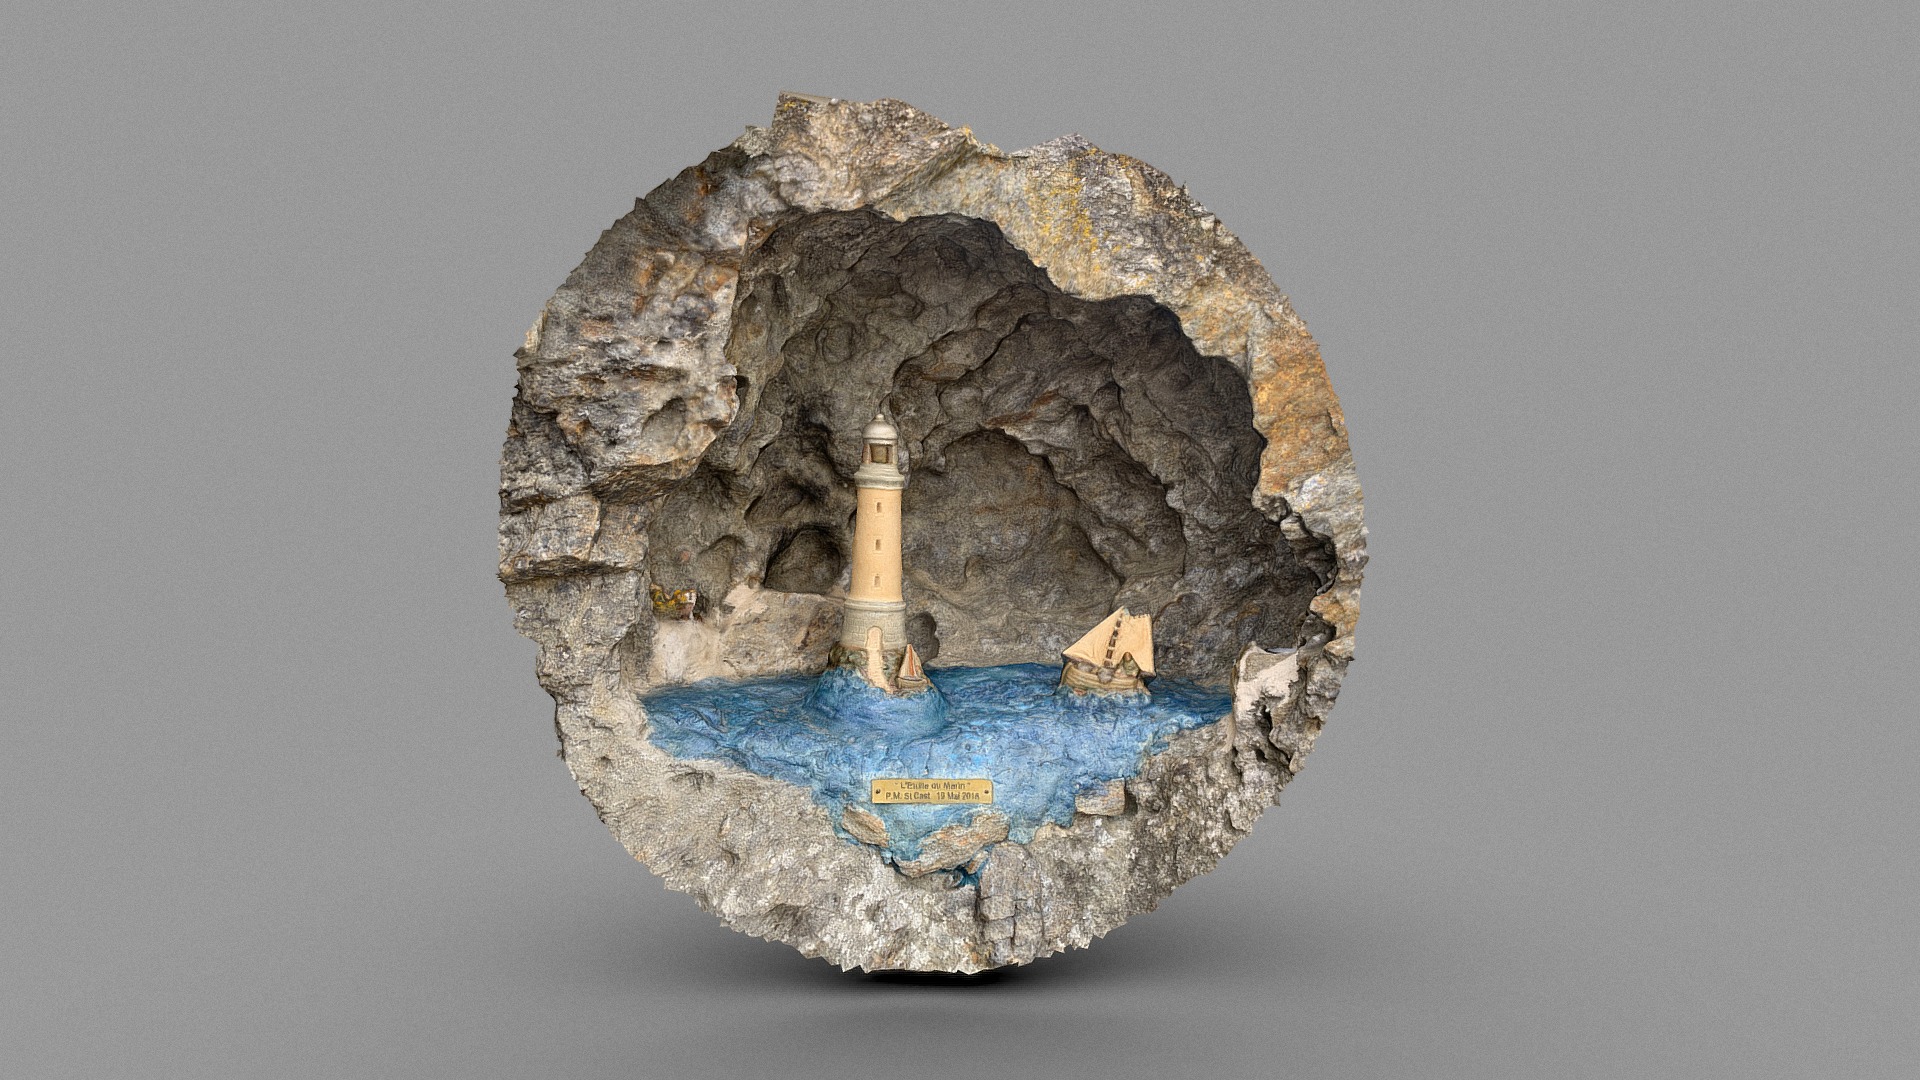 3D model Lighthouse beacon model - This is a 3D model of the Lighthouse beacon model. The 3D model is about a rock with a blue and white design on it.